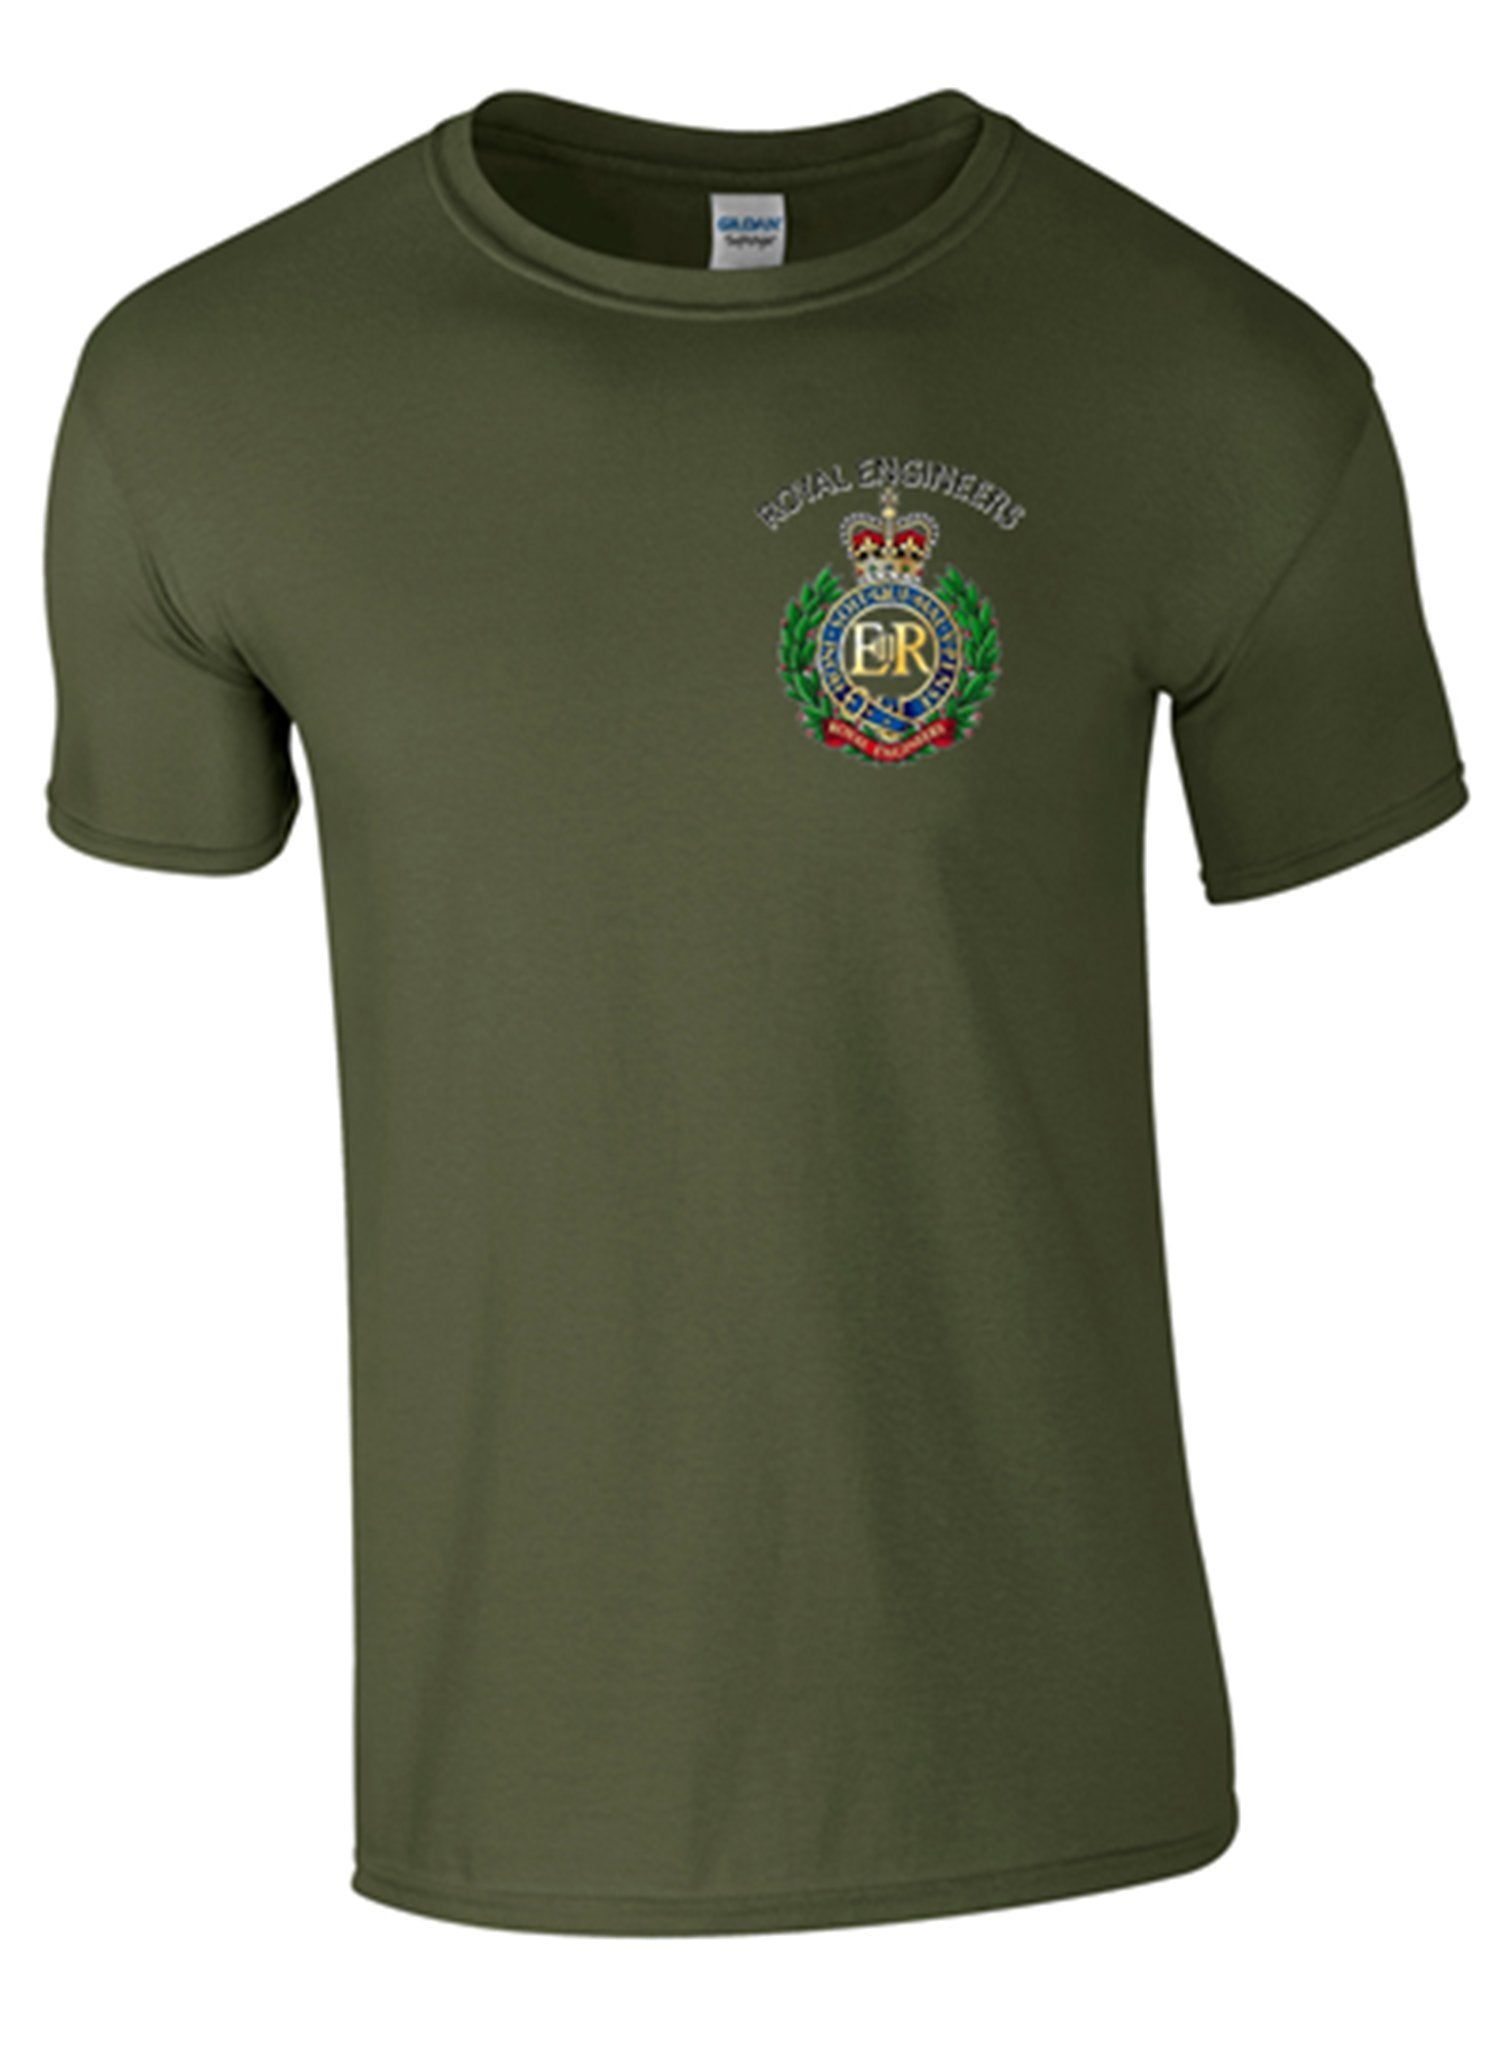 Royal Engineers T-Shirt Front Logo only Official MOD Approved Merchandise - Army 1157 kit Green / 3XL Army 1157 Kit